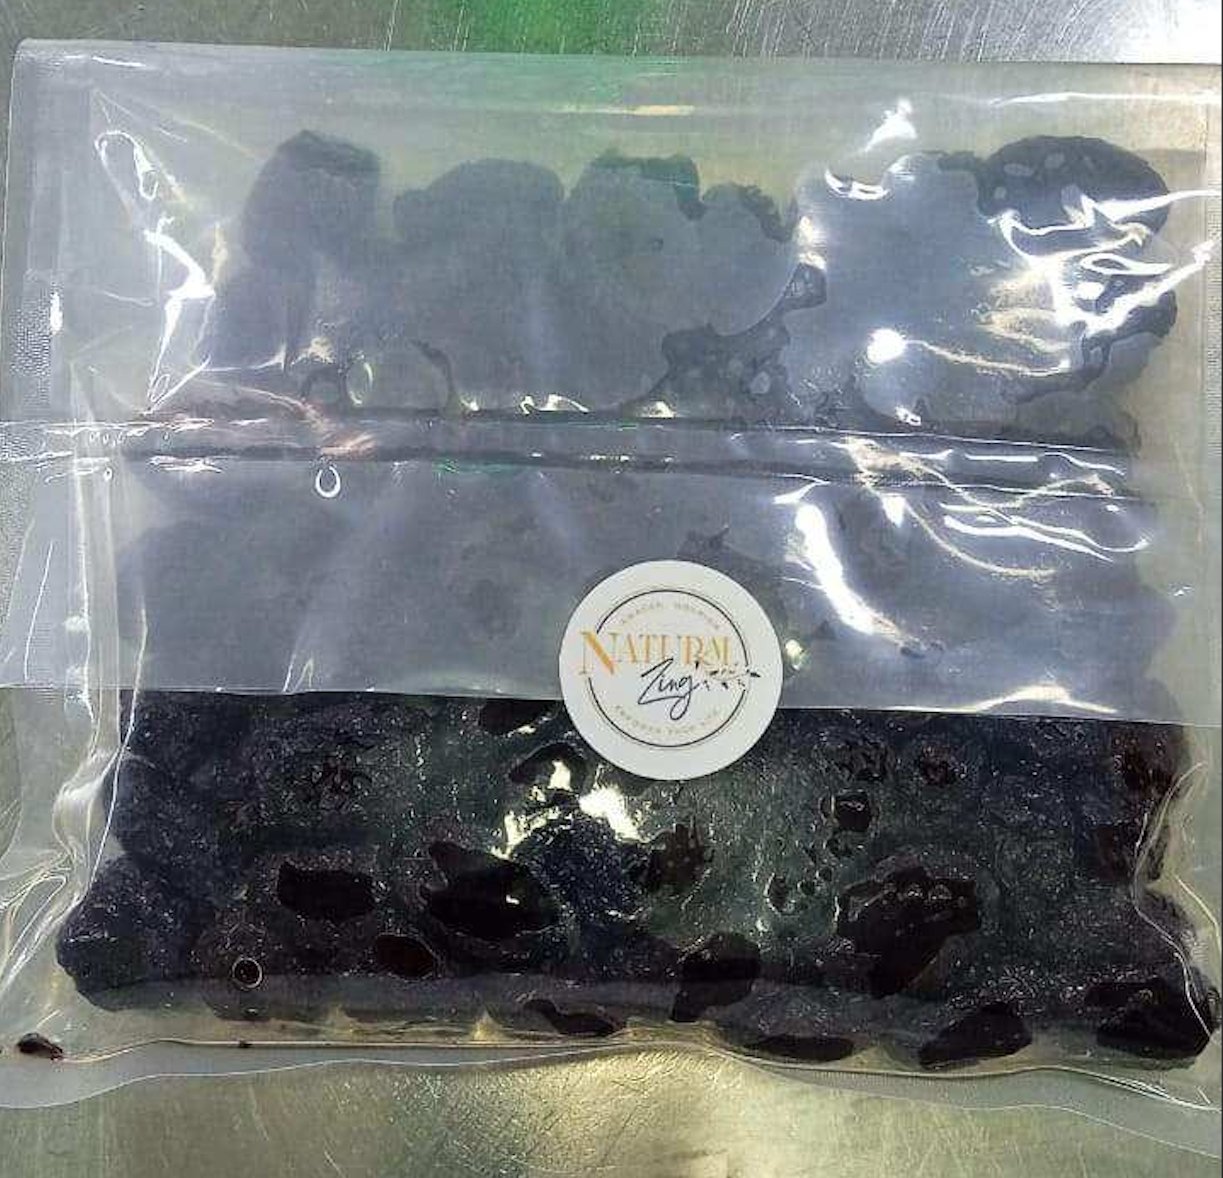 Peruvian Black Dried Olives (Salted, Pitted) 8 oz bag